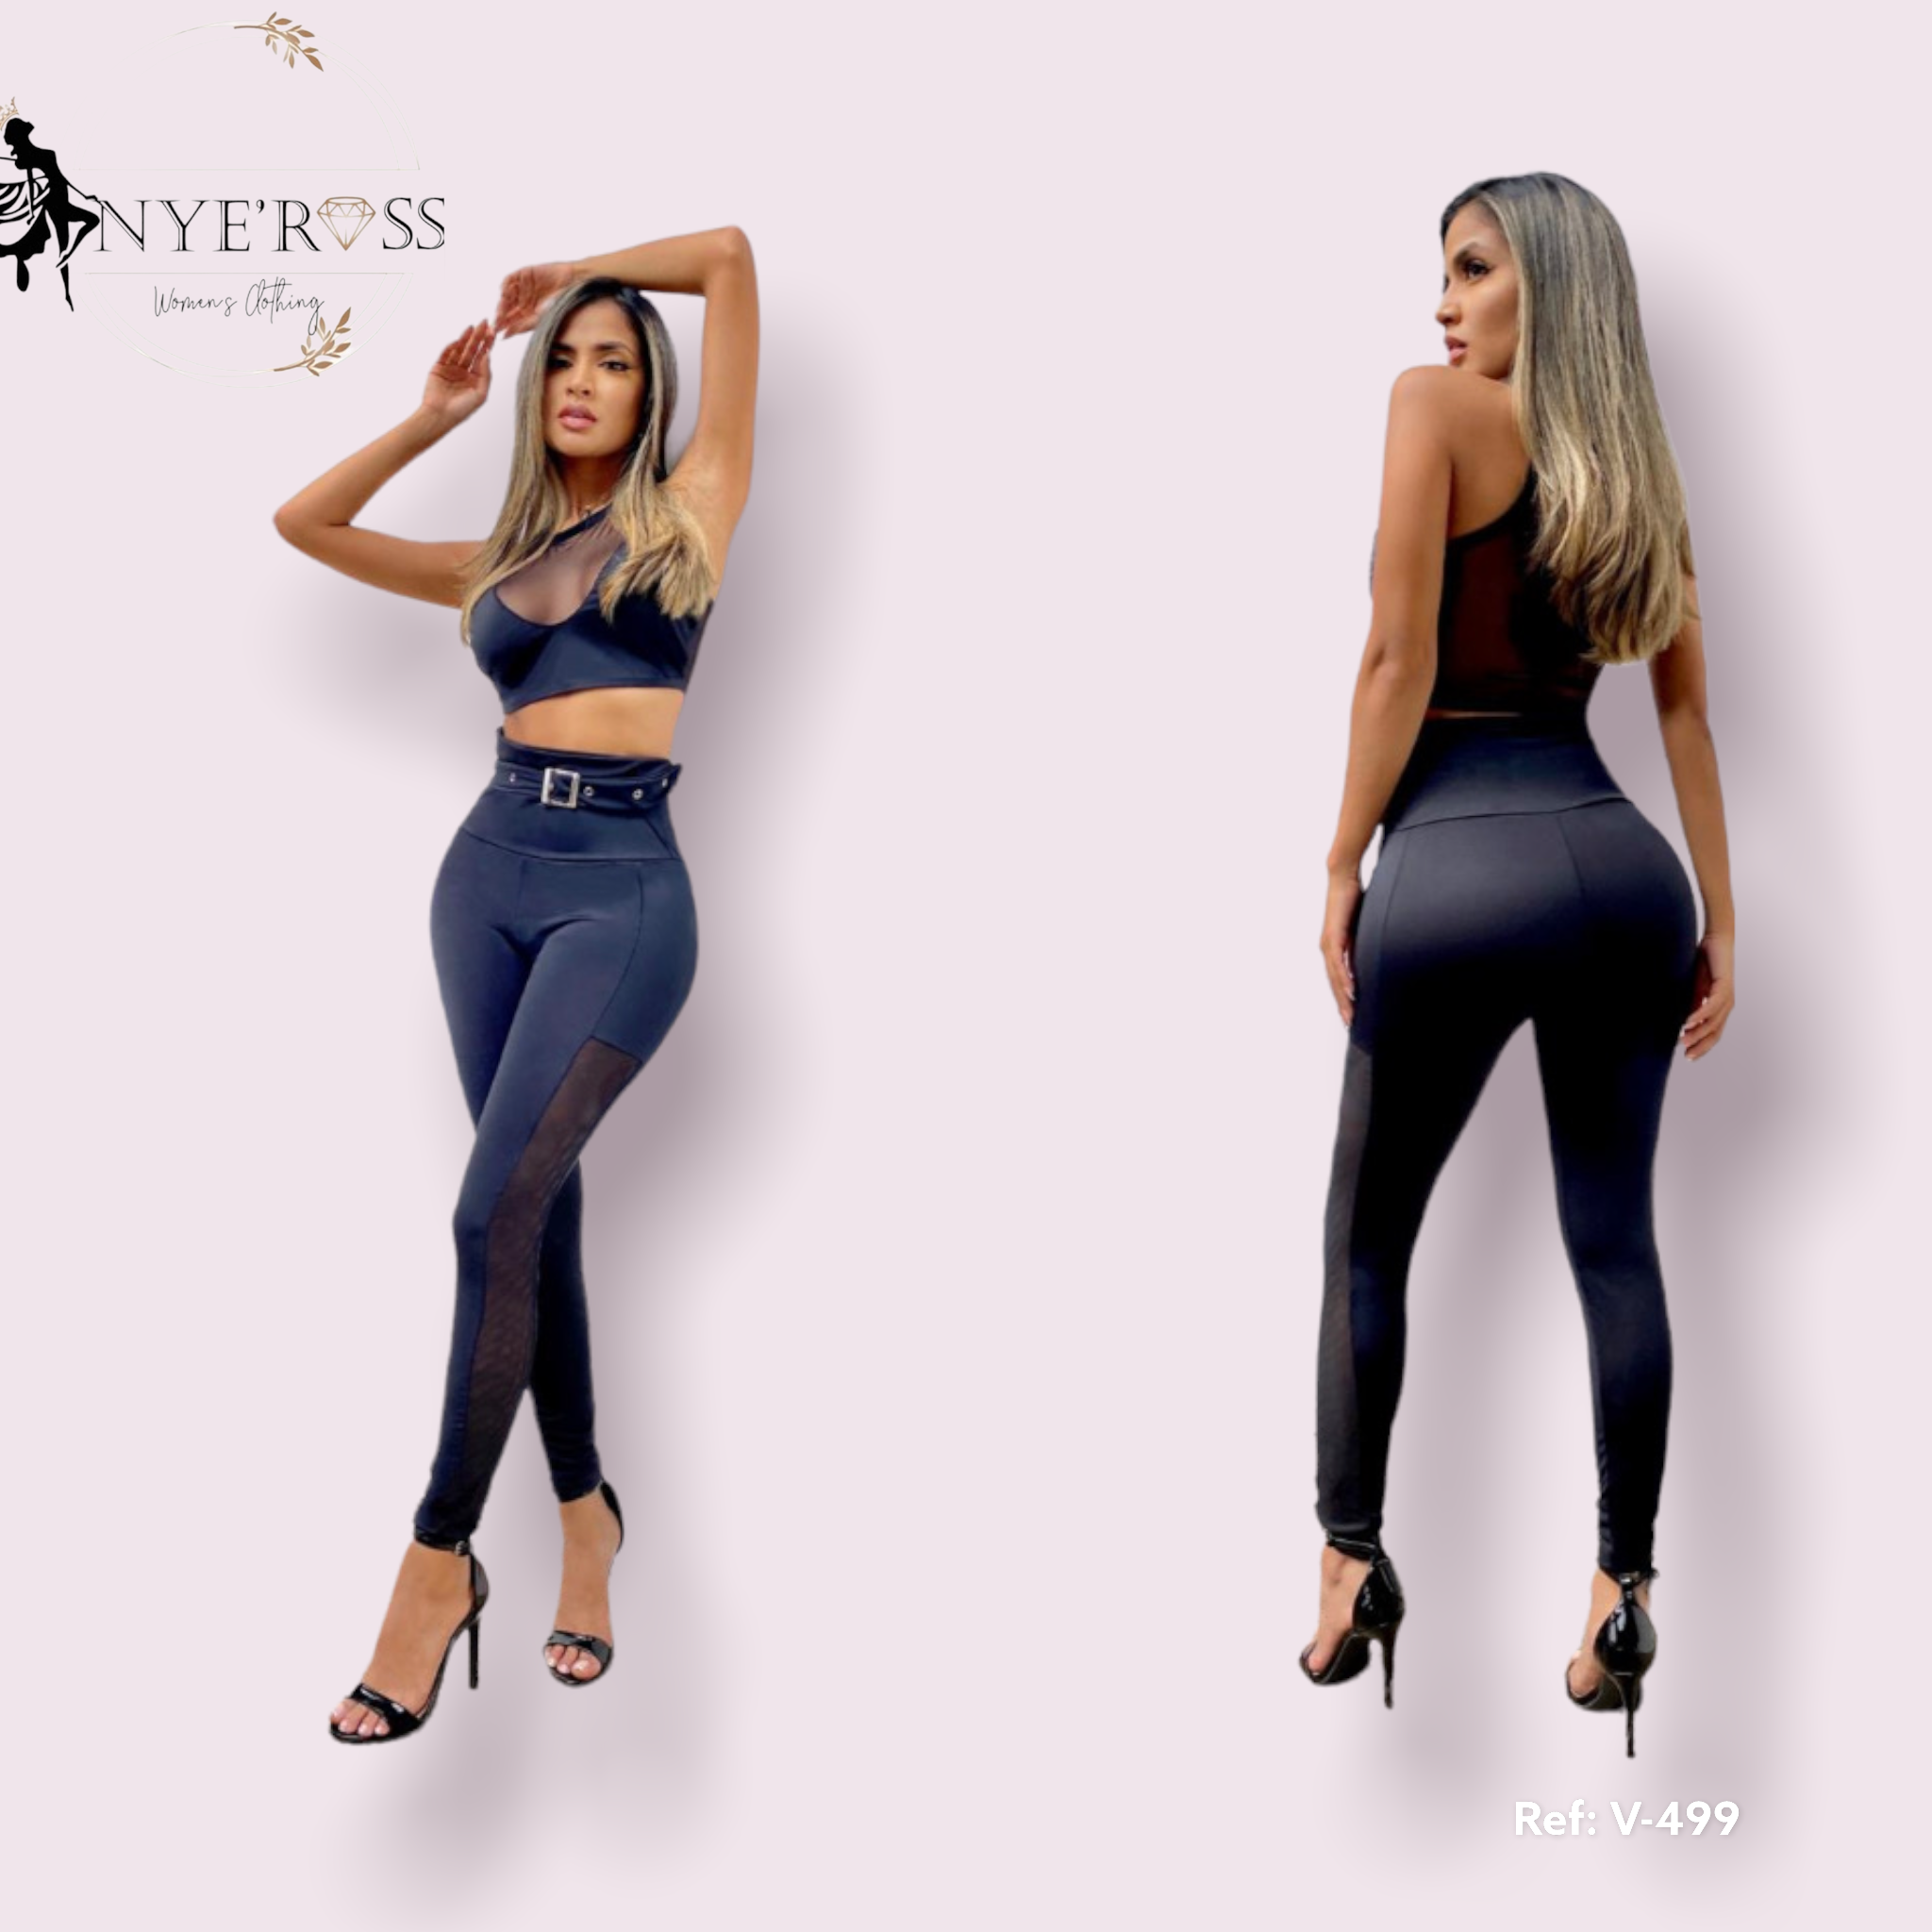 Legging with side mesh and crop-top